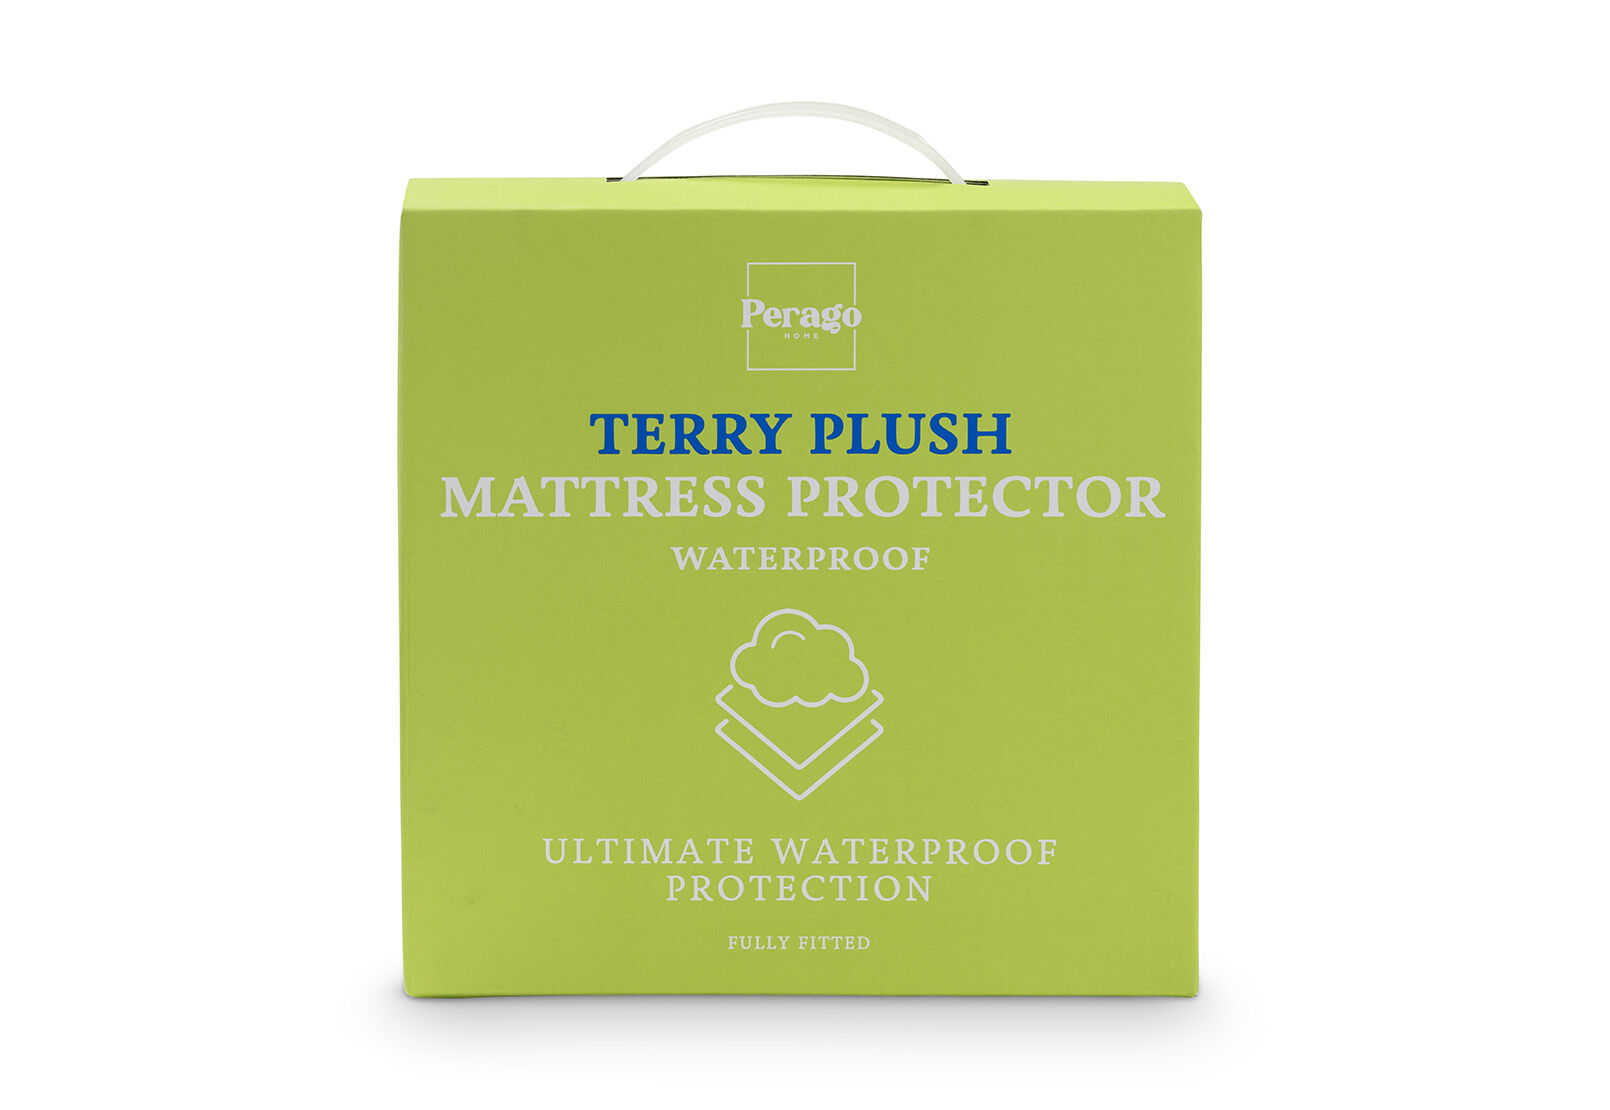 DOUBLE MATTRESS PROTECTOR